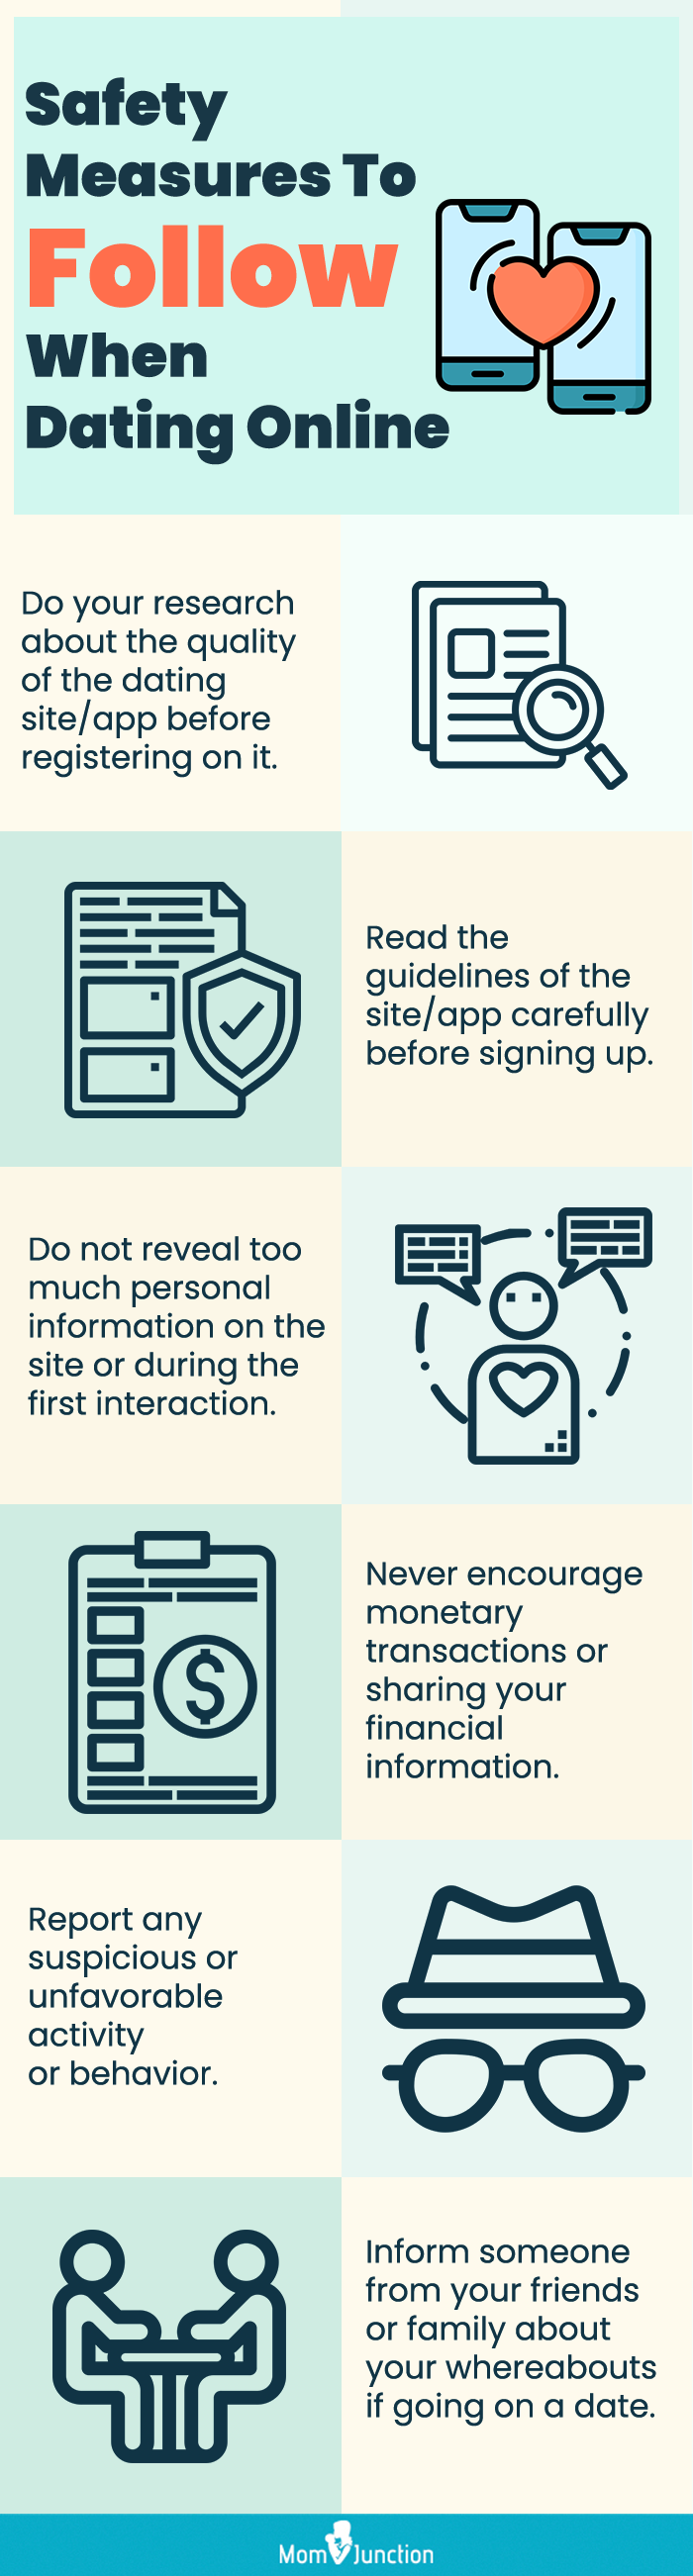 safety measures to follow when dating (infographic)